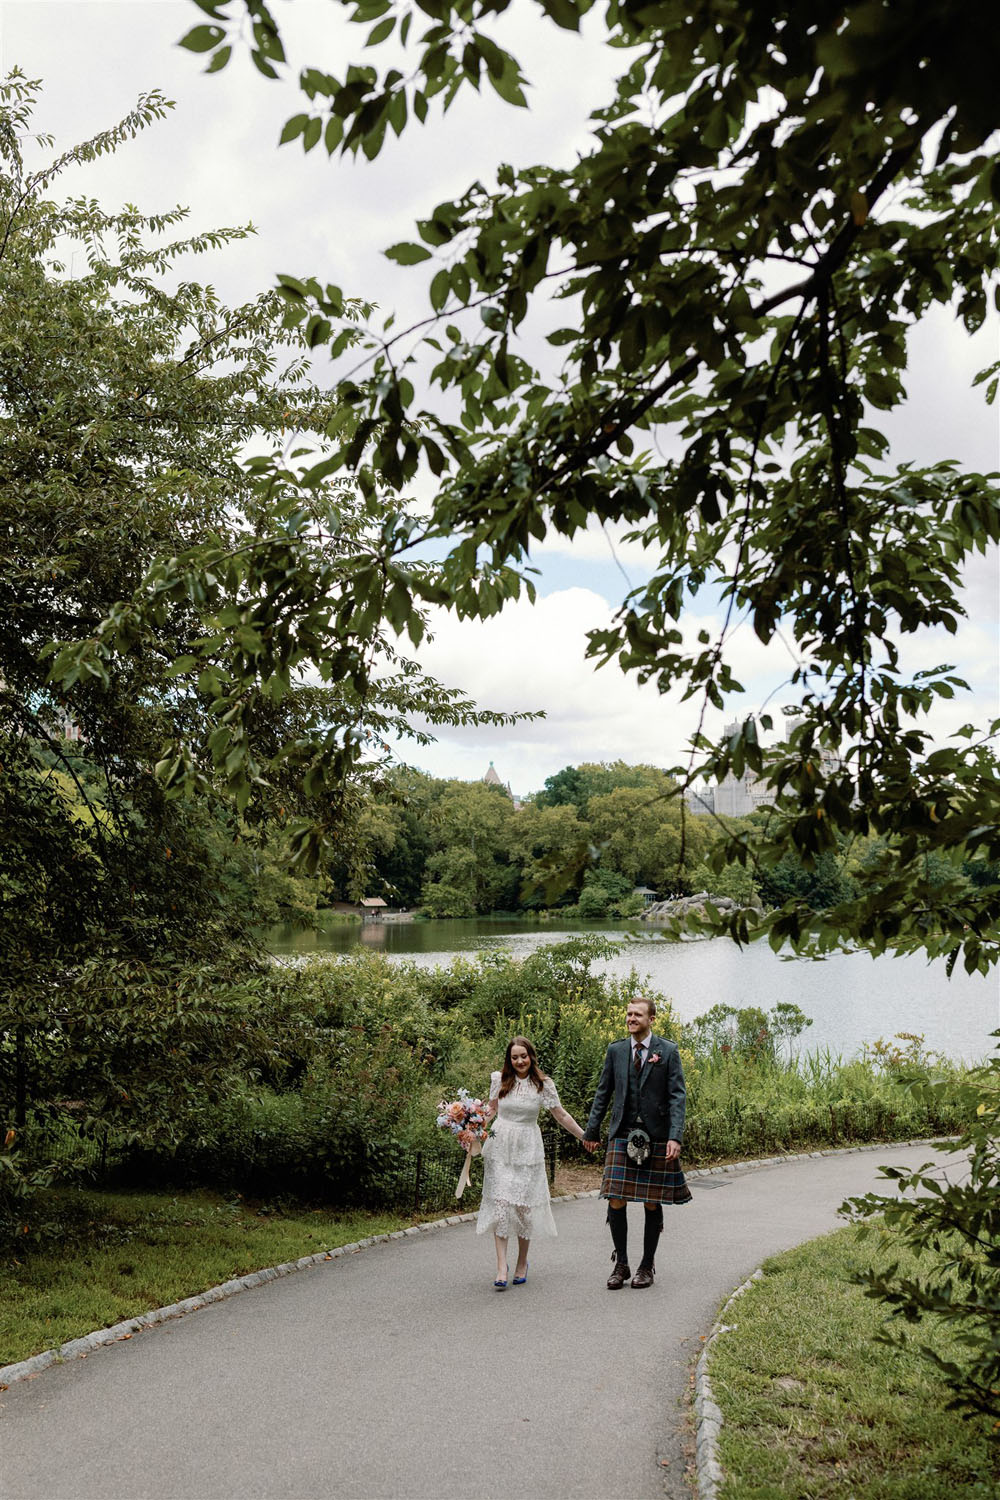 How to plan an NYC elopement from out of town